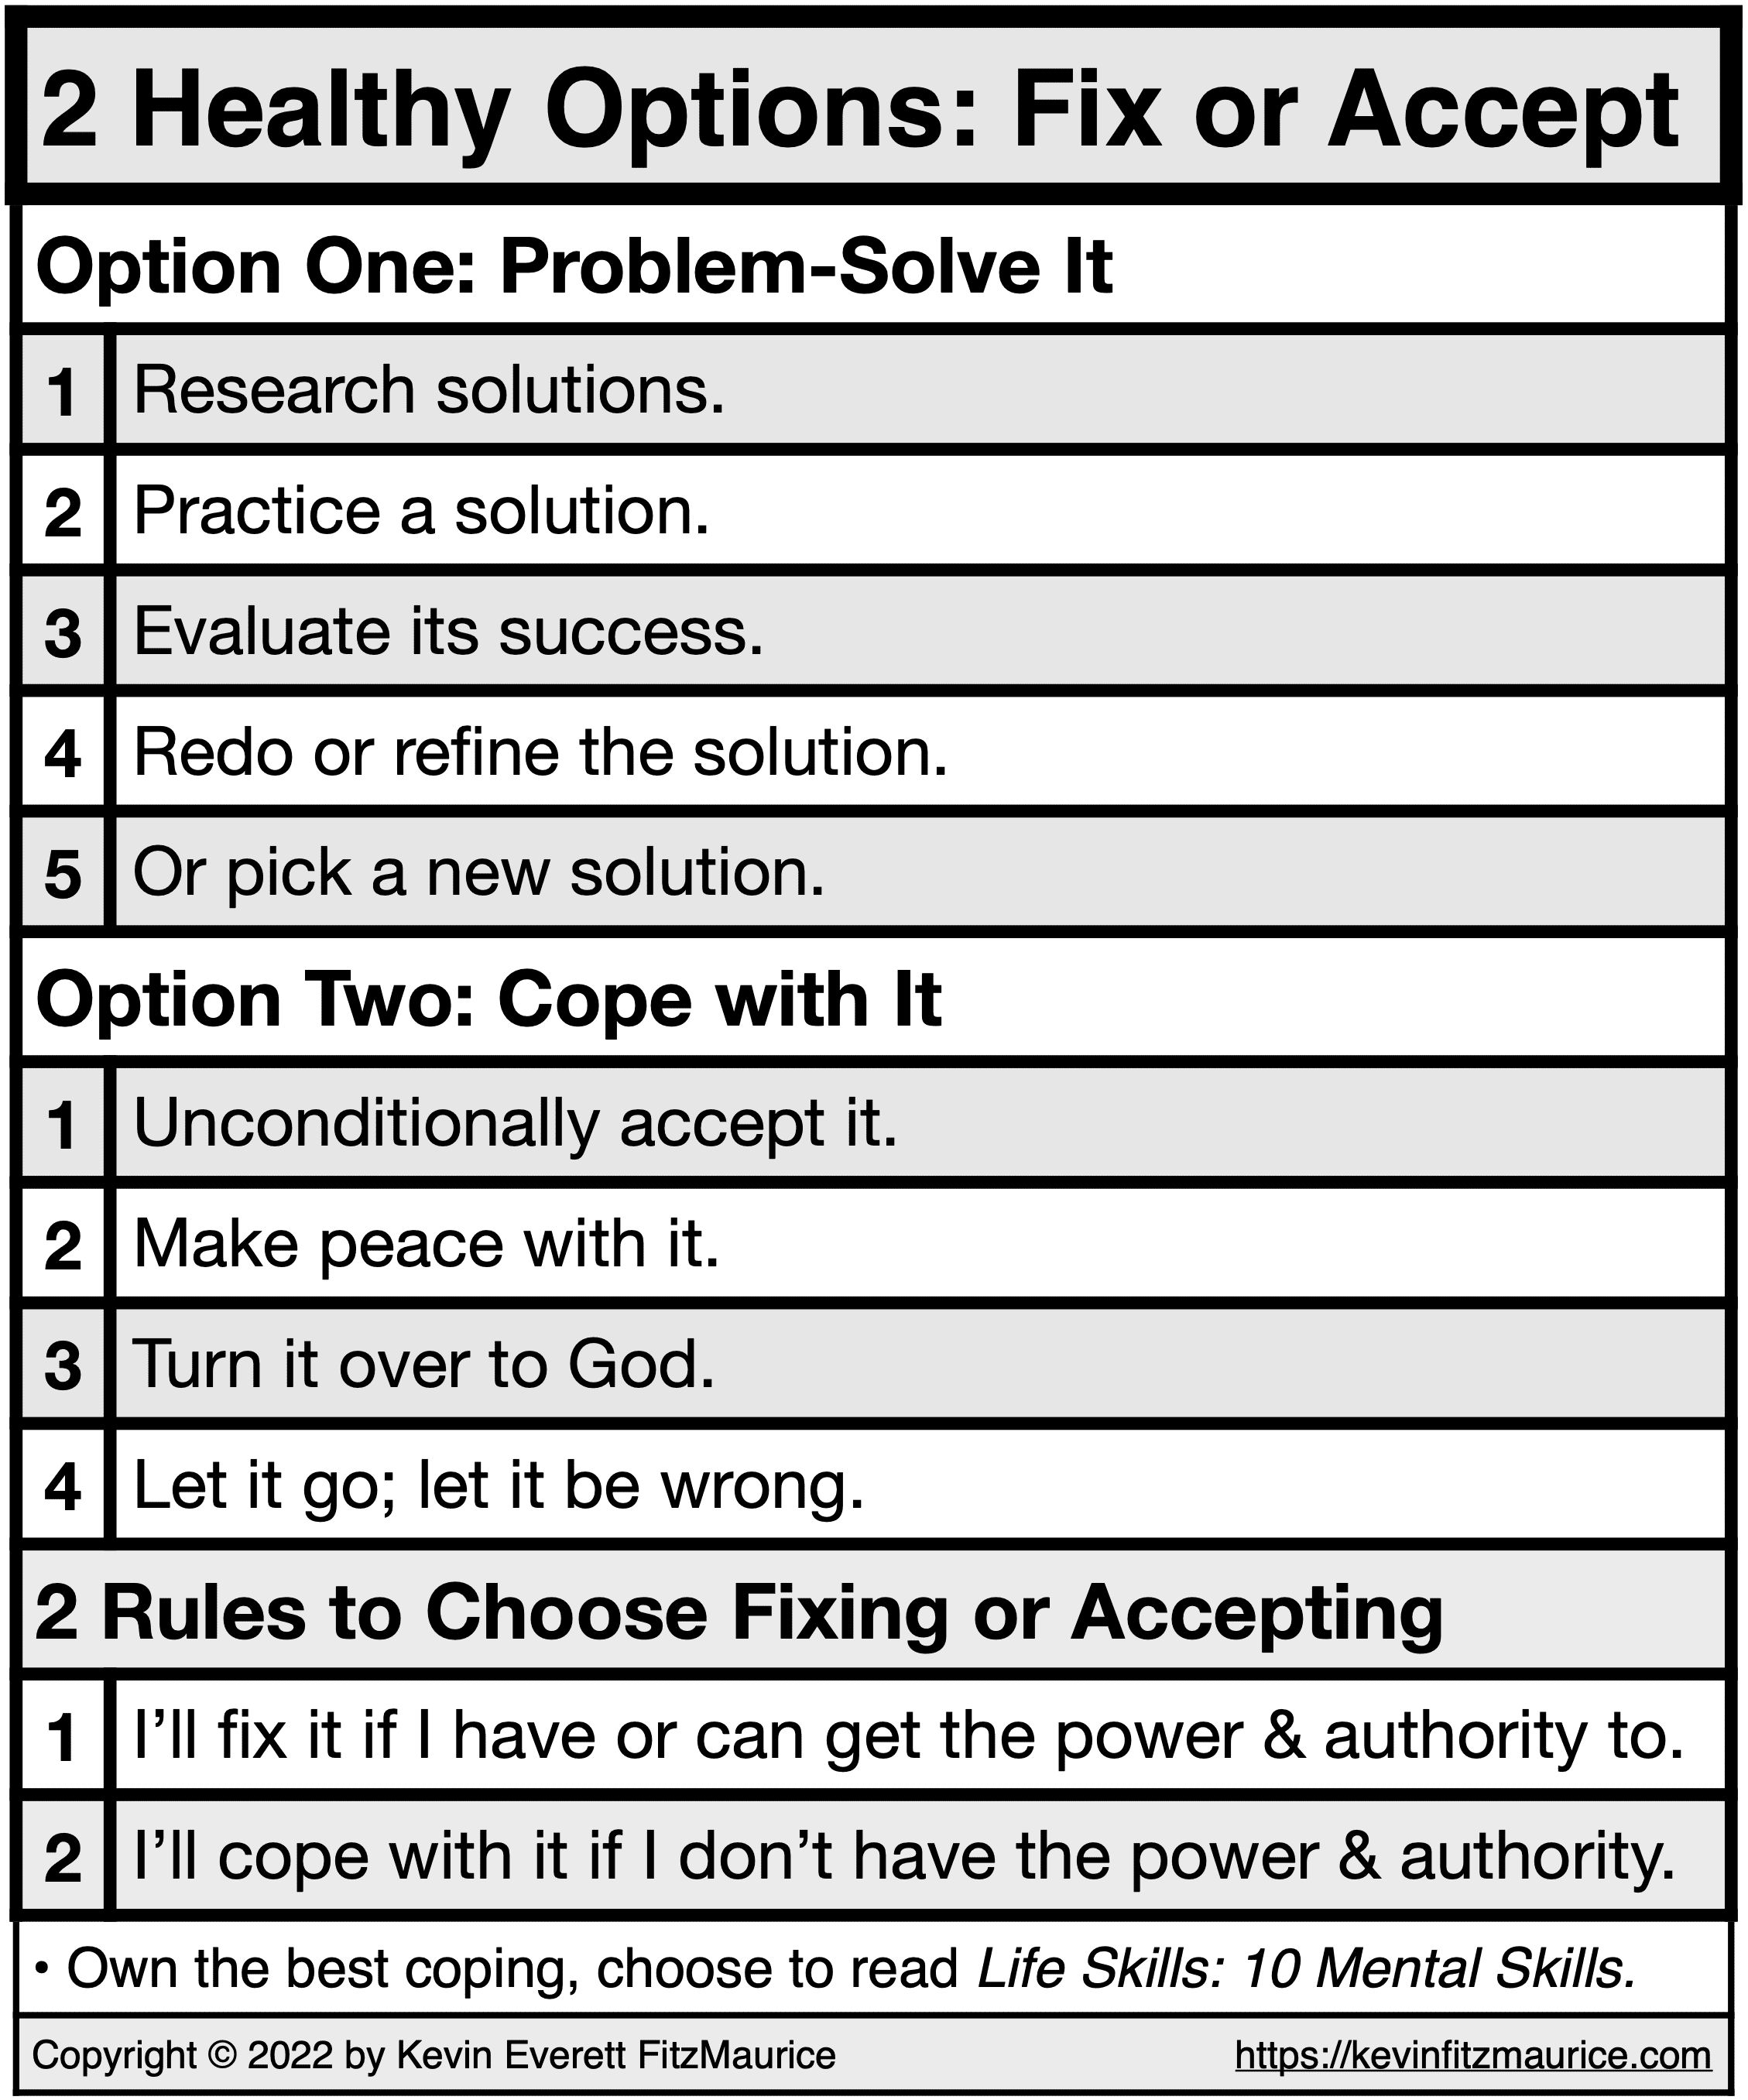 You Have 2 Healthy Options for Dealing with Problems